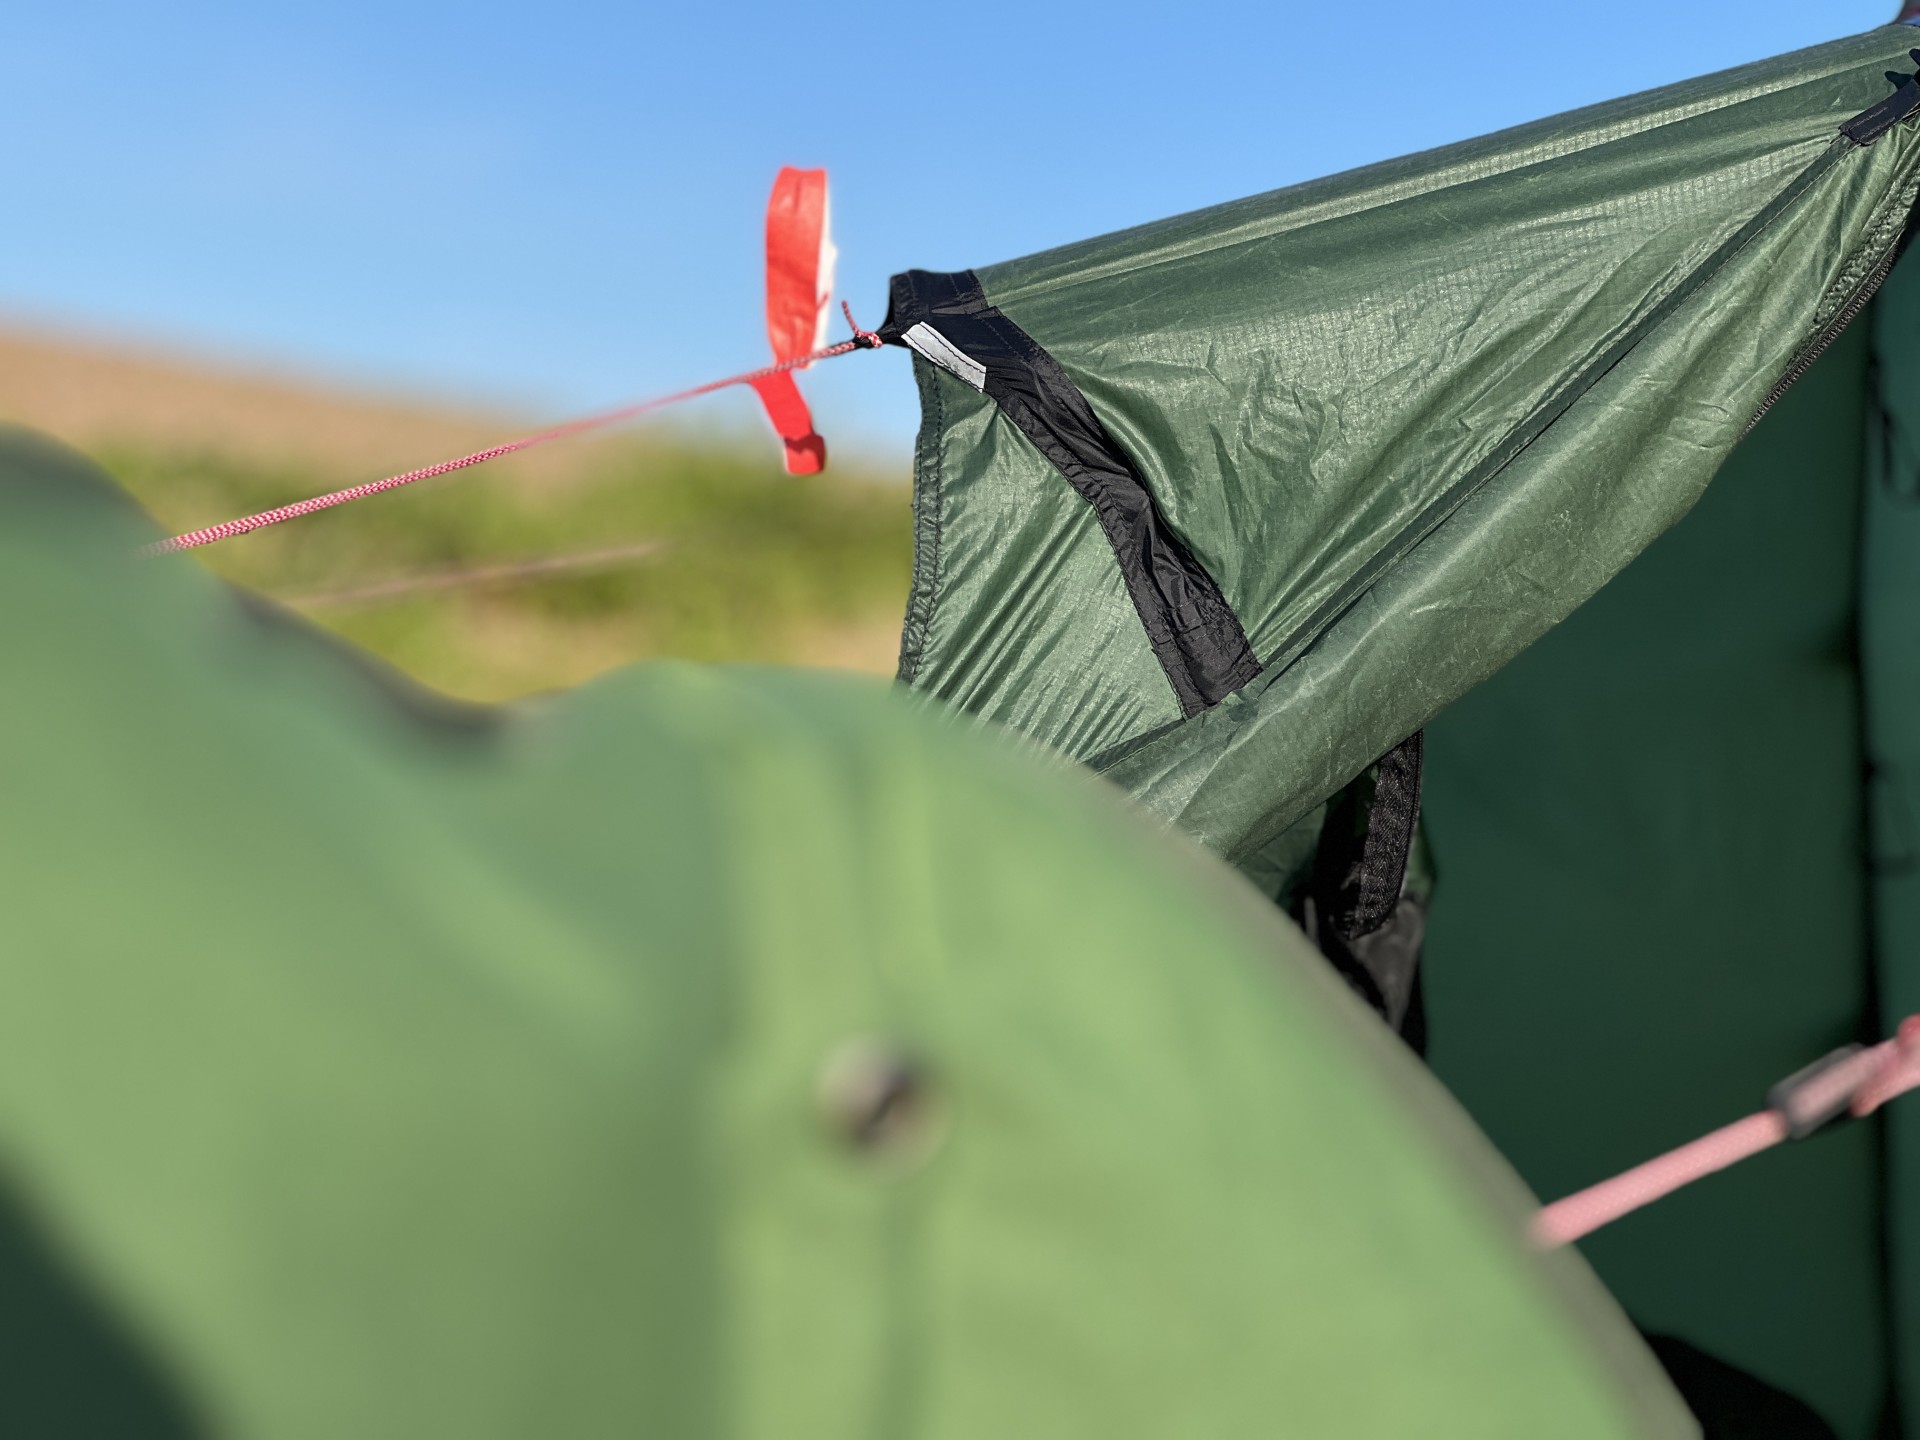 Hilleberg tents are used by NOMAD Sea Kayaking guides.